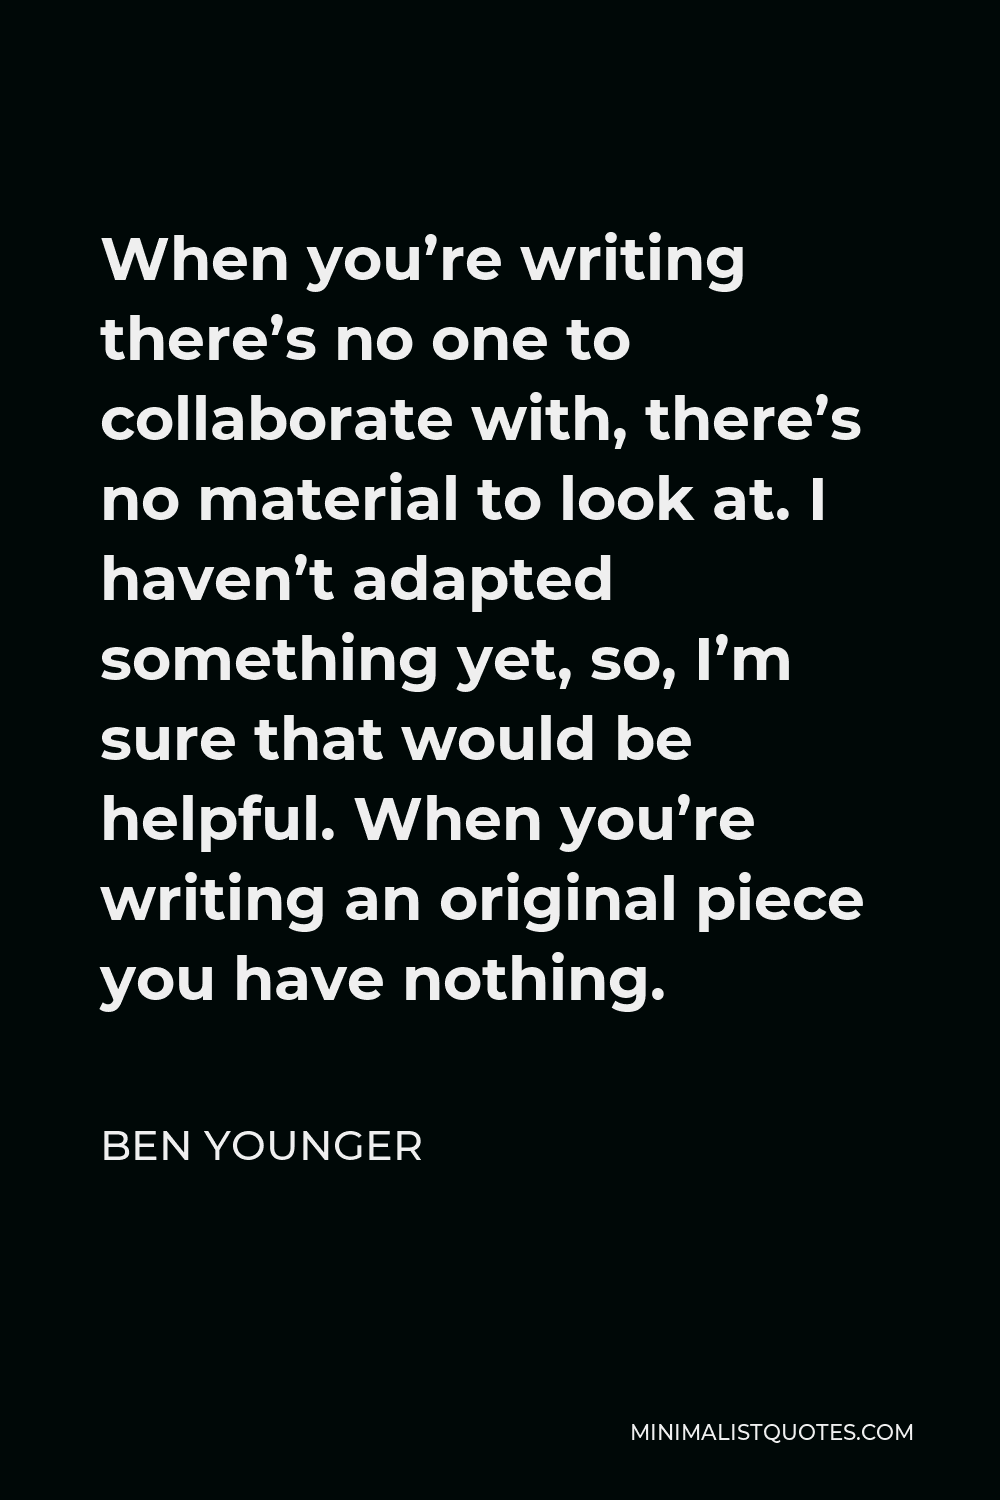 Ben Younger Quote - When you’re writing there’s no one to collaborate with, there’s no material to look at. I haven’t adapted something yet, so, I’m sure that would be helpful. When you’re writing an original piece you have nothing.